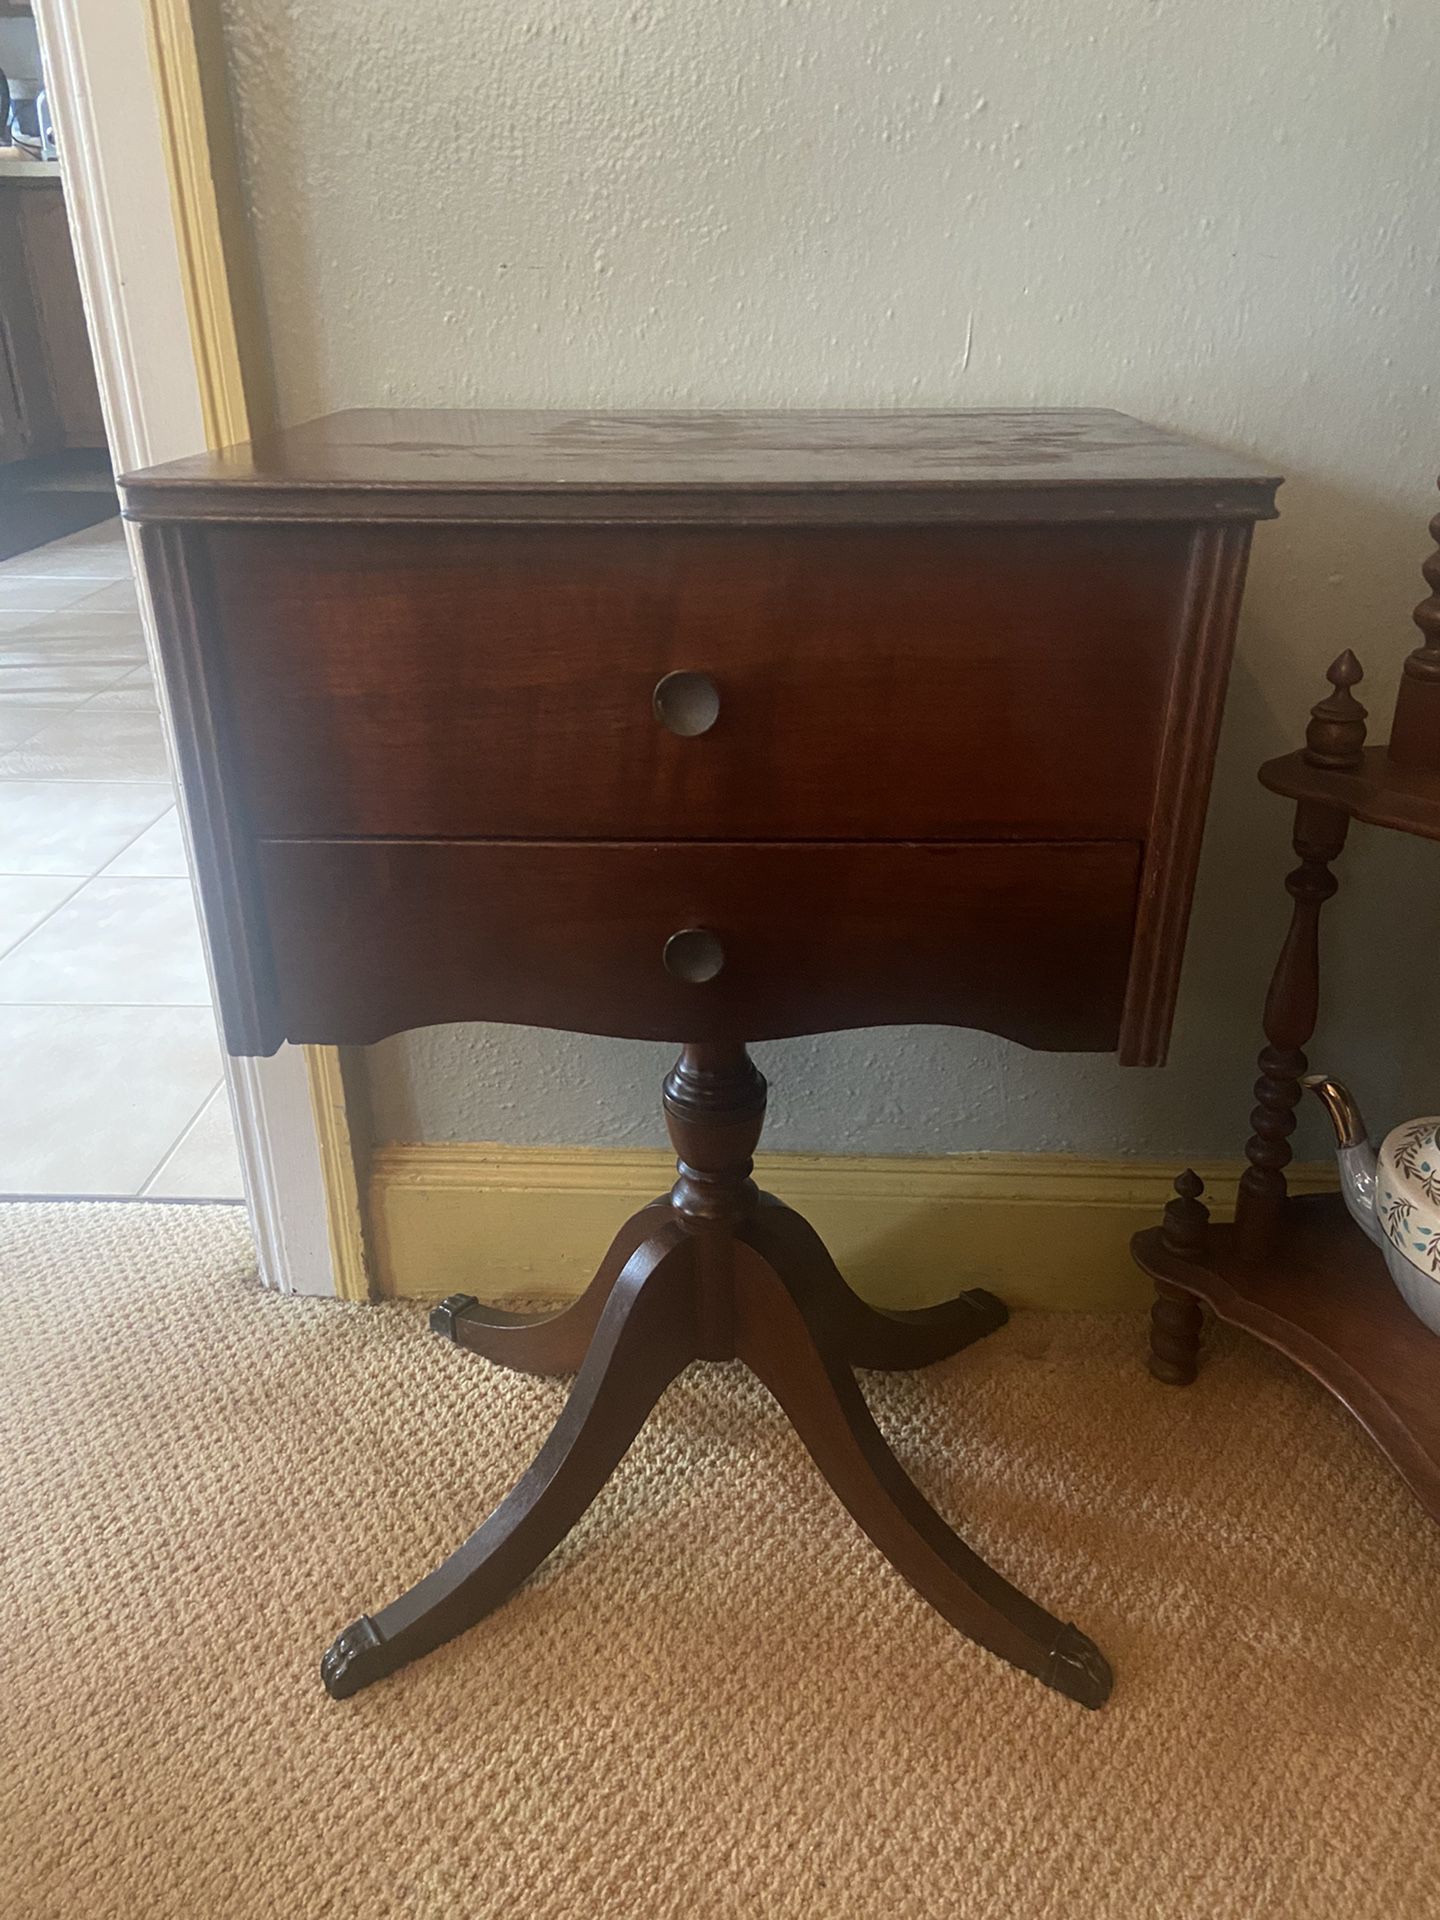 Antique Sewing Cabinet Stand (16”w x 12 1/4”d x 24”h)